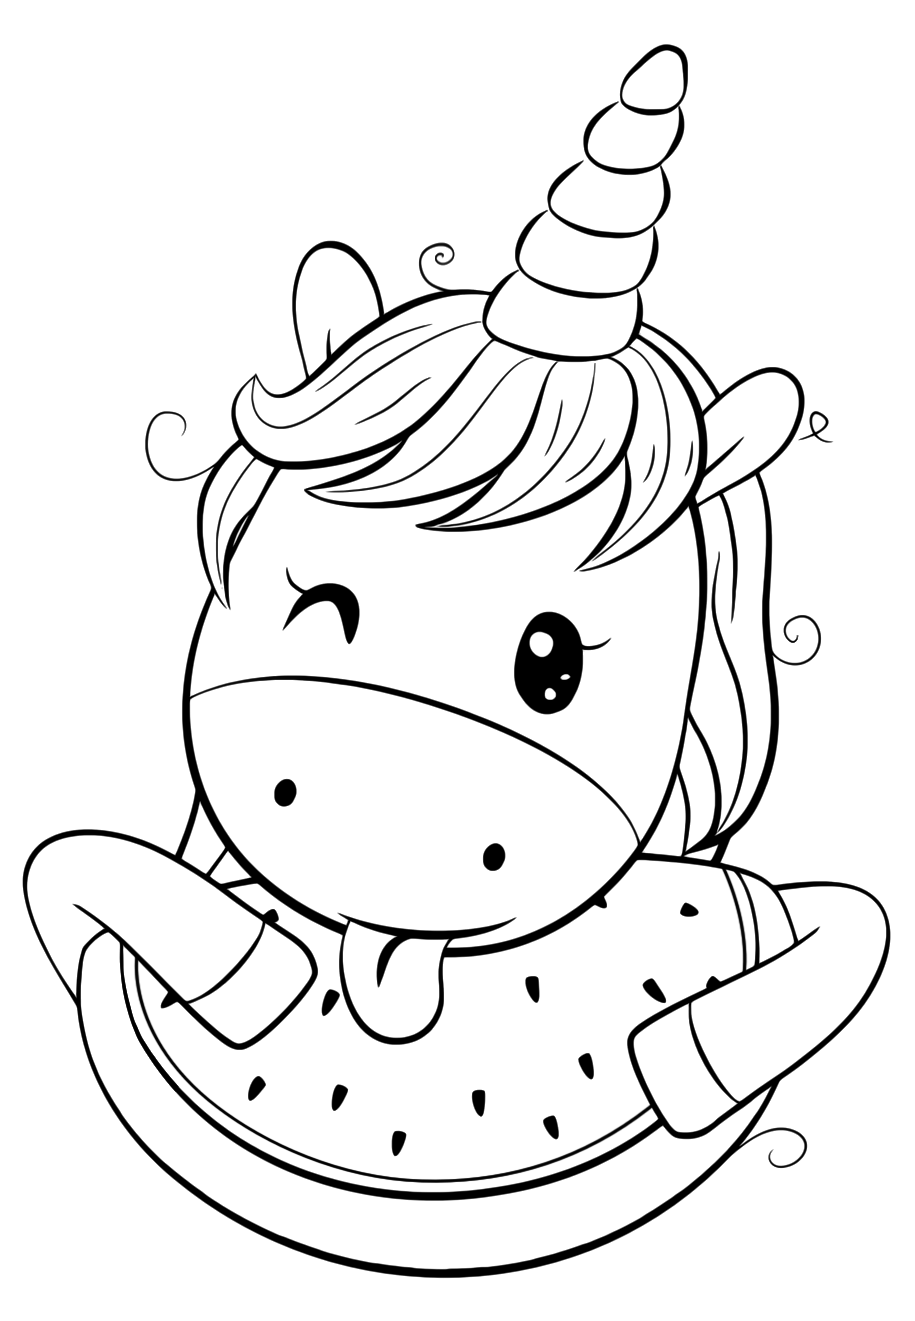 Cute unicorn coloring pages - YouLoveIt.com